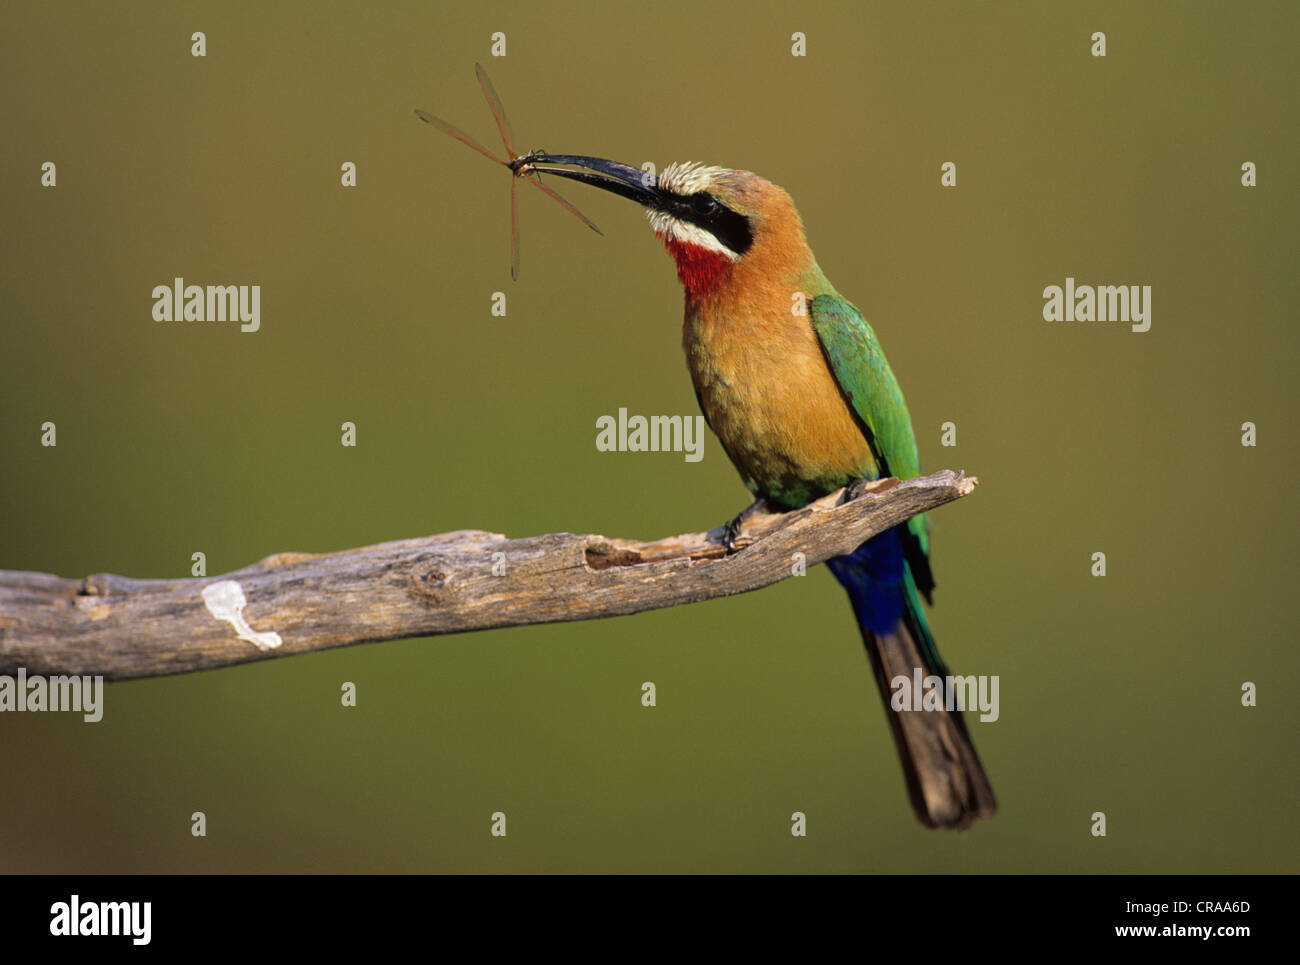 Whitefronted Bee-eater (Merops bullockoides), with dragonfly, Kruger National Park, Mpumalanga, South Africa, Africa Stock Photo